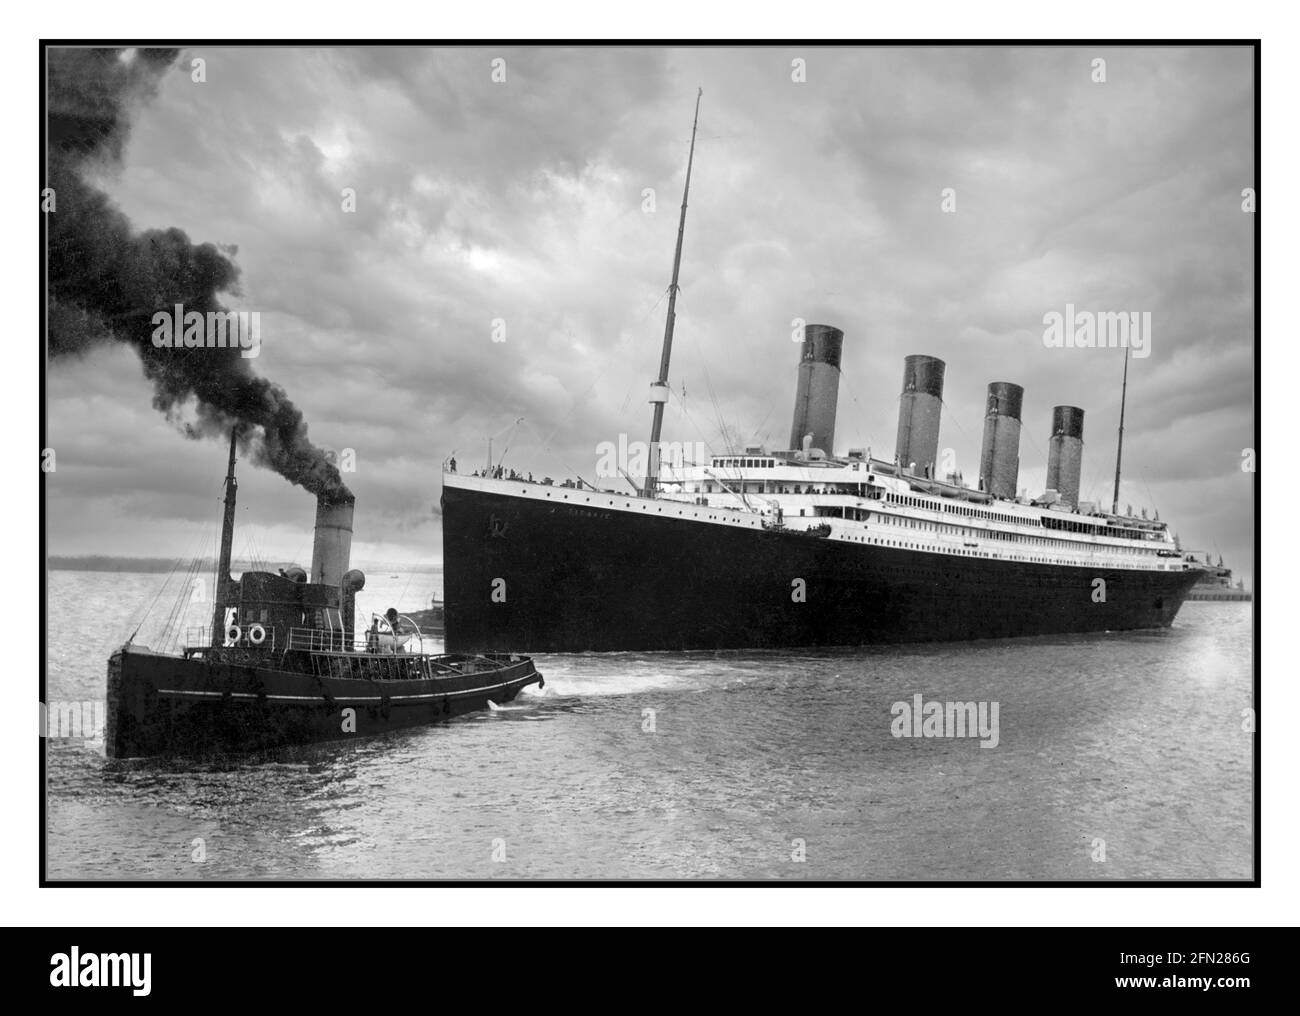 TITANIC 1912 Vintage historic RMS Titanic with the aid of a pilot tug leaving Southampton for her ill-fated maiden voyage on April 10, 1912. The White Star Dock, later known as Ocean Dock, opened in 1911. It was from here, Berth 44, that RMS Titanic was to leave Southampton on 10th April 1912. Stock Photo